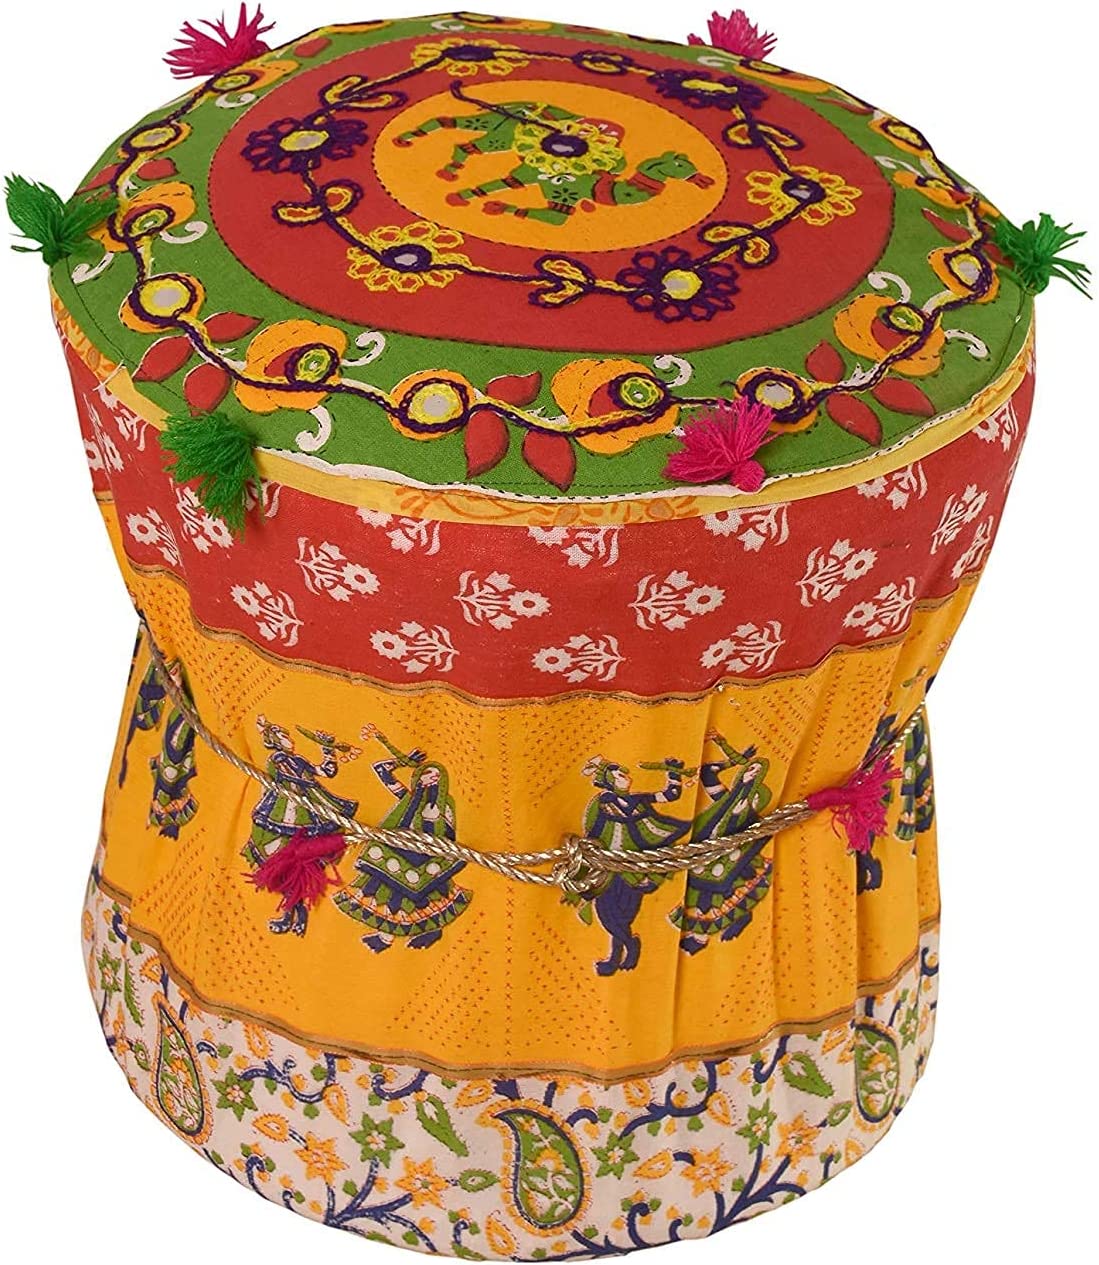 Lamansh rajasthani mudda for event decoration Assorted colors / Pack of 15 Wholesale Pack of 15 Rajasthani Mudda Stools at Rs 700 each (Free shipping included)  Event Decoration / Perfect for Ethnic Indian events & backdrop / Handmade Patchwork Cotton Single Mudda/Ottoman/Pouffe